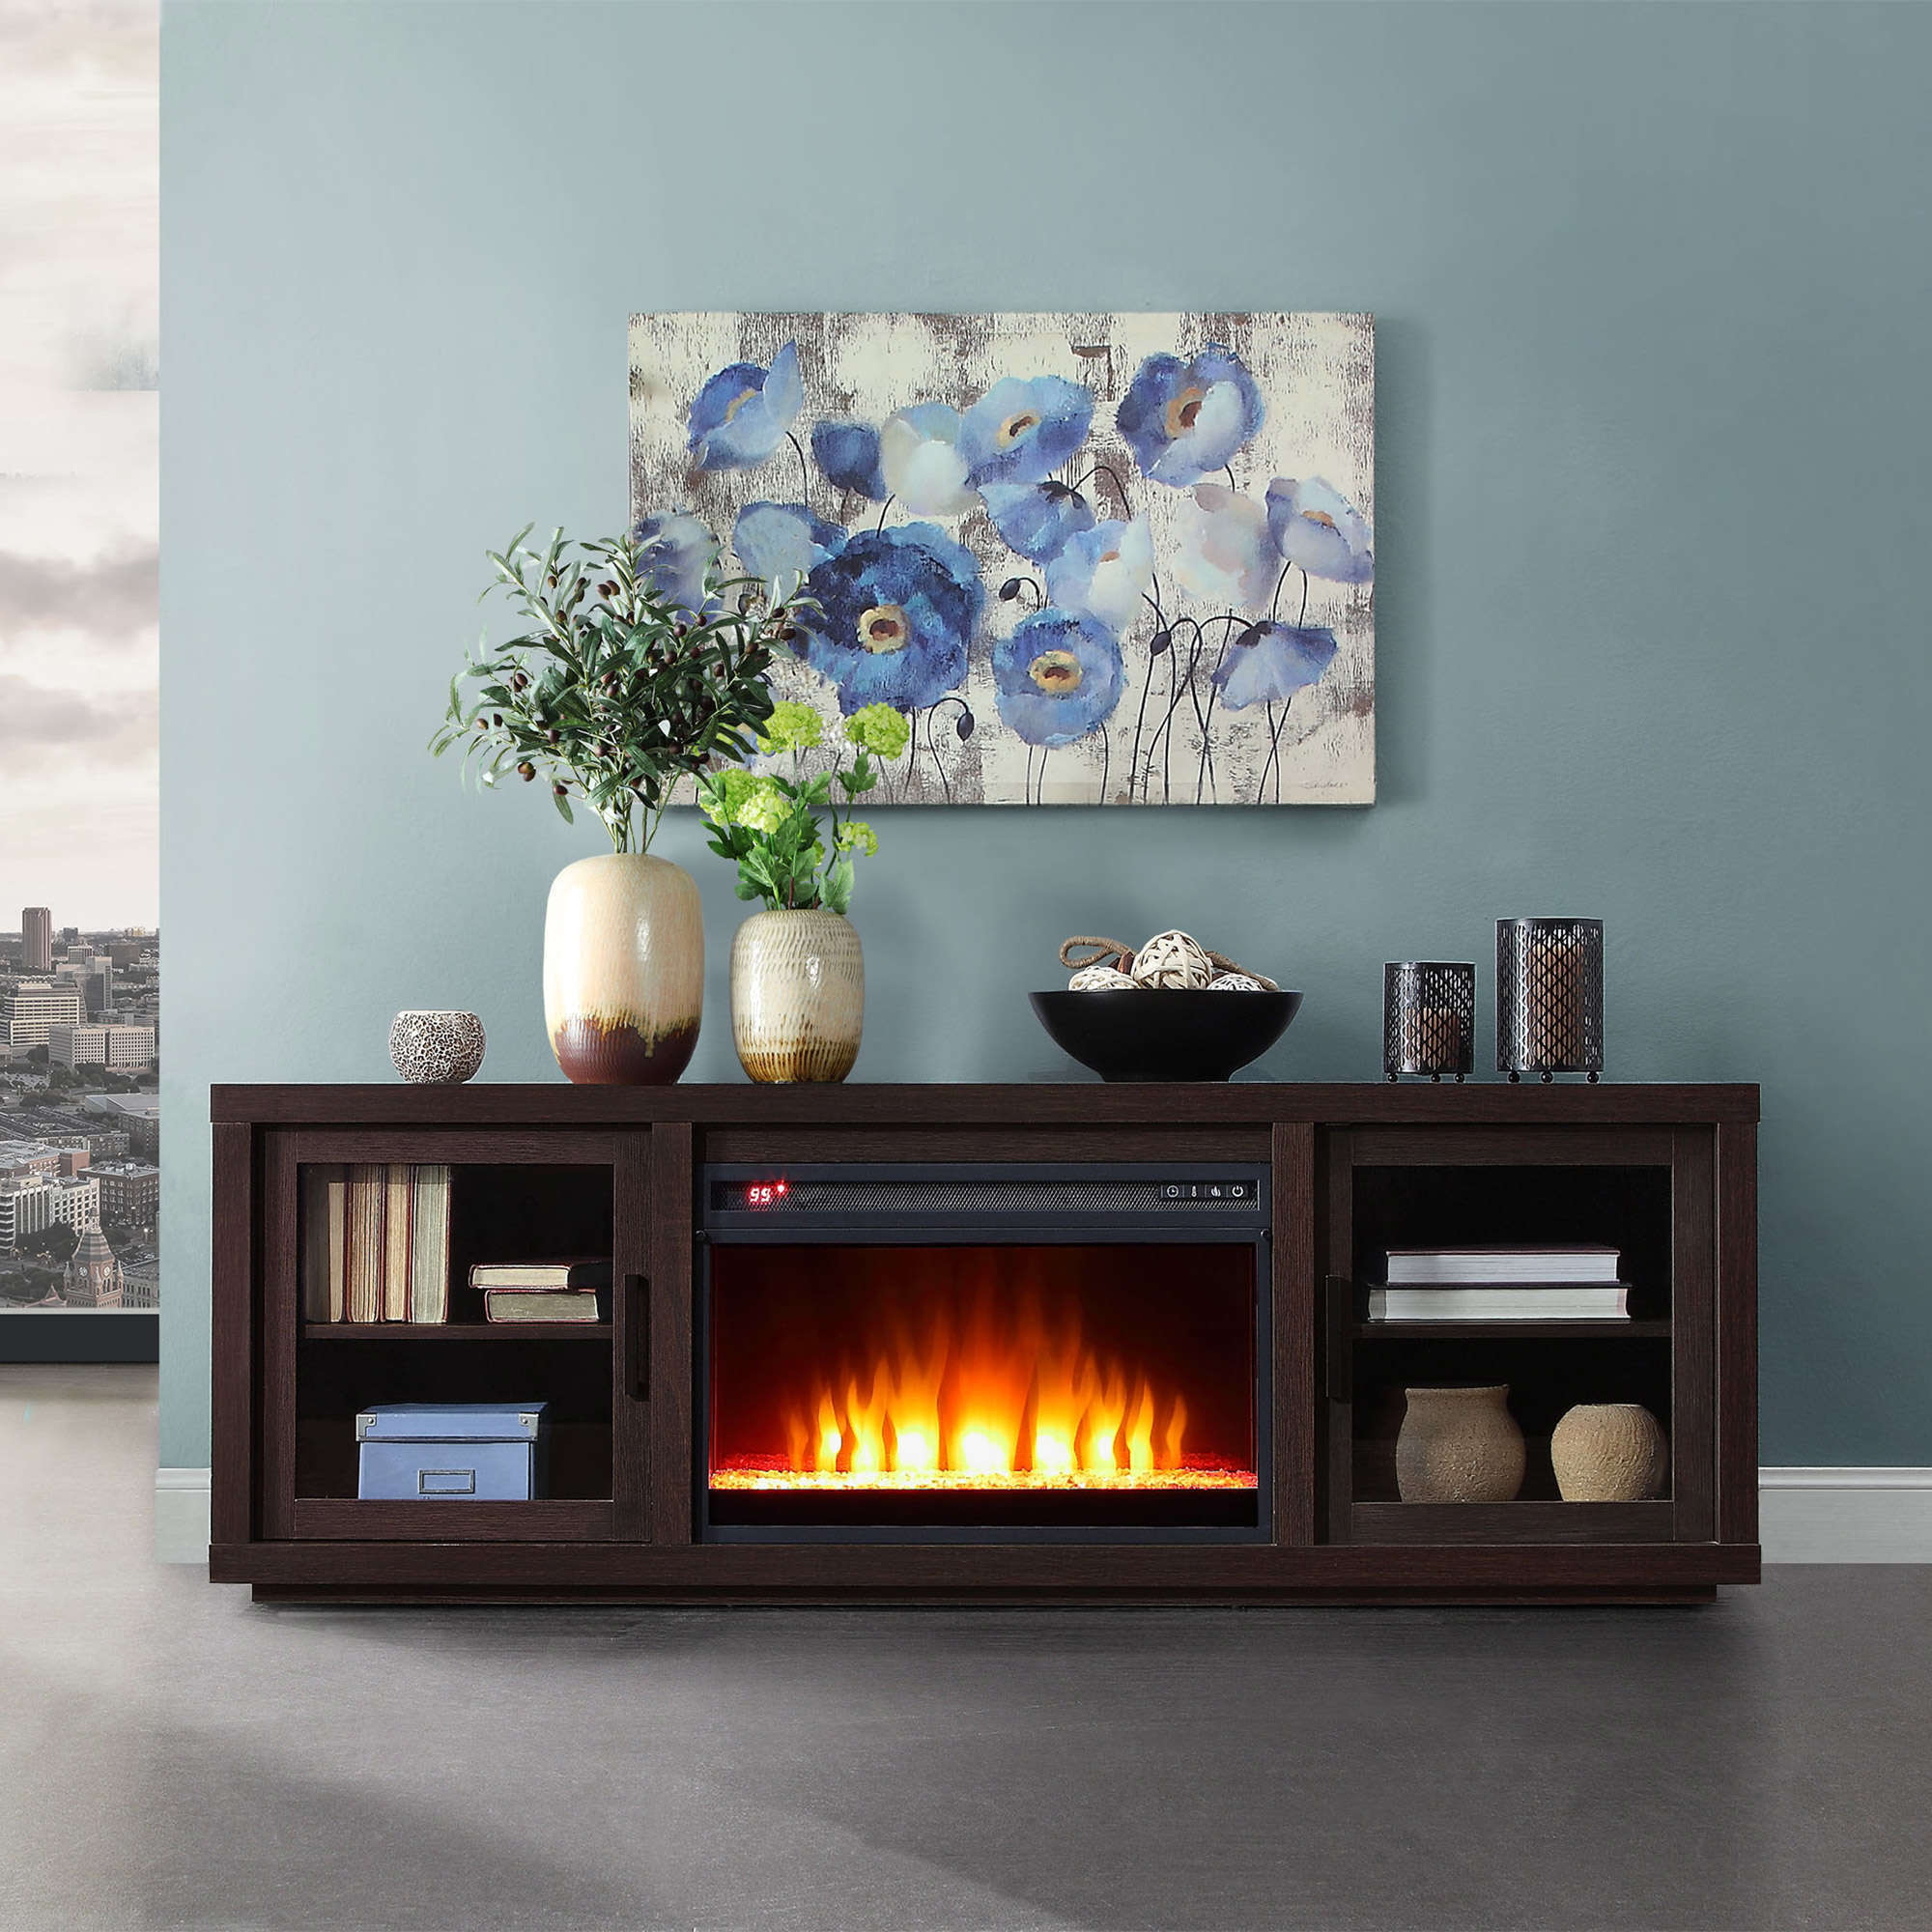 Better Homes & Gardens Steele Media Fireplace Console Television Stand for TVs up to 80" Espresso Finish - image 3 of 9